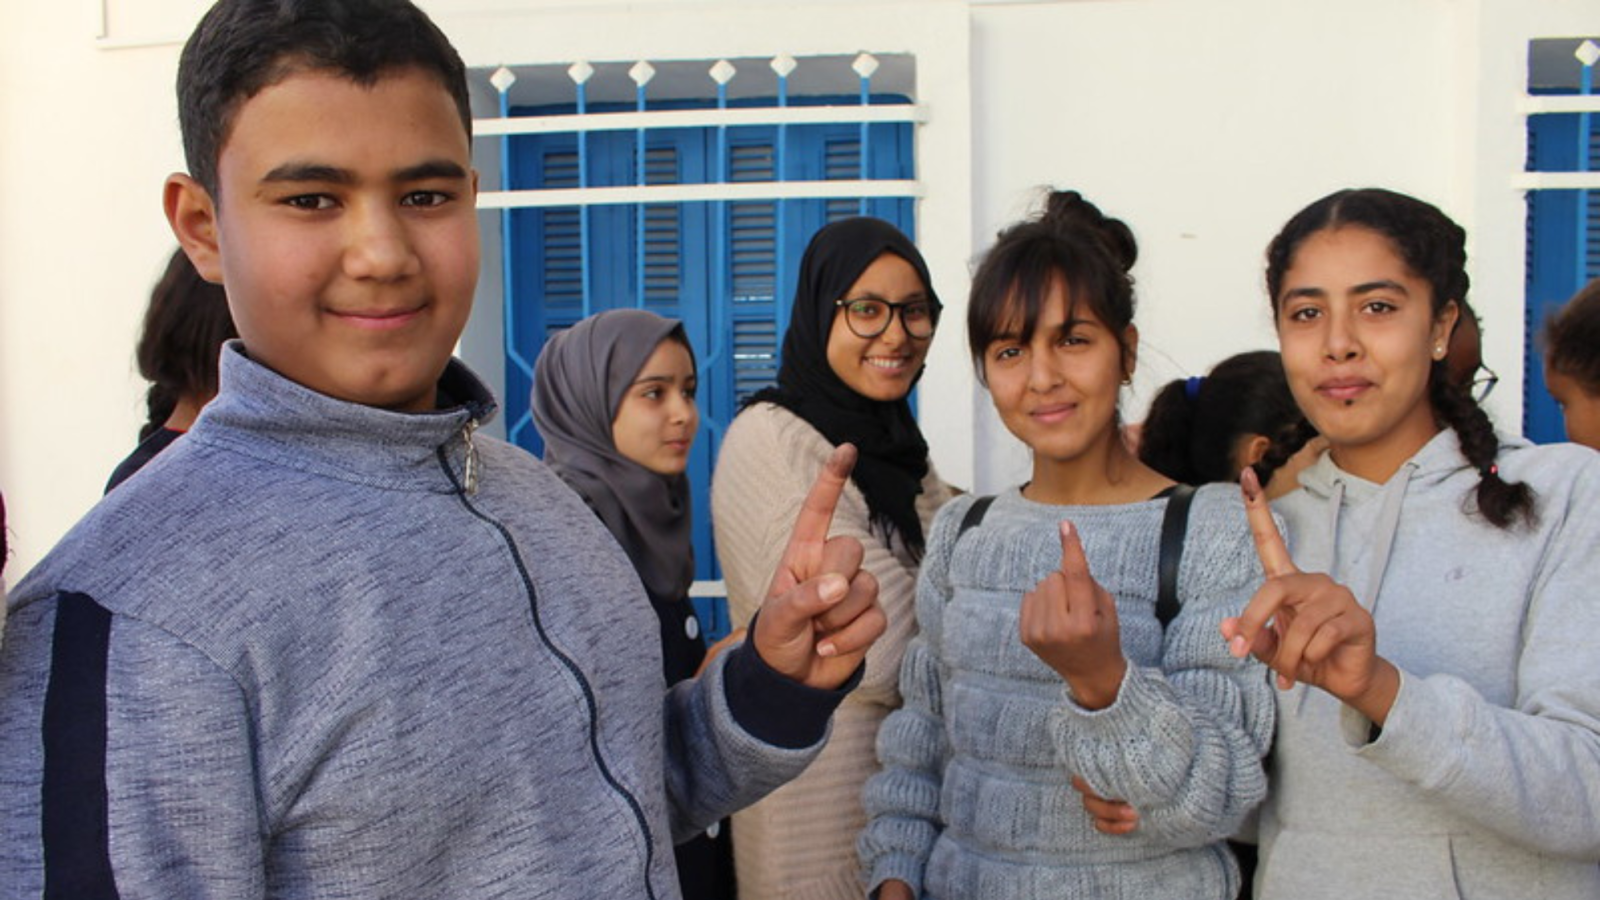 Youth in Tunisia learning how to vote. 